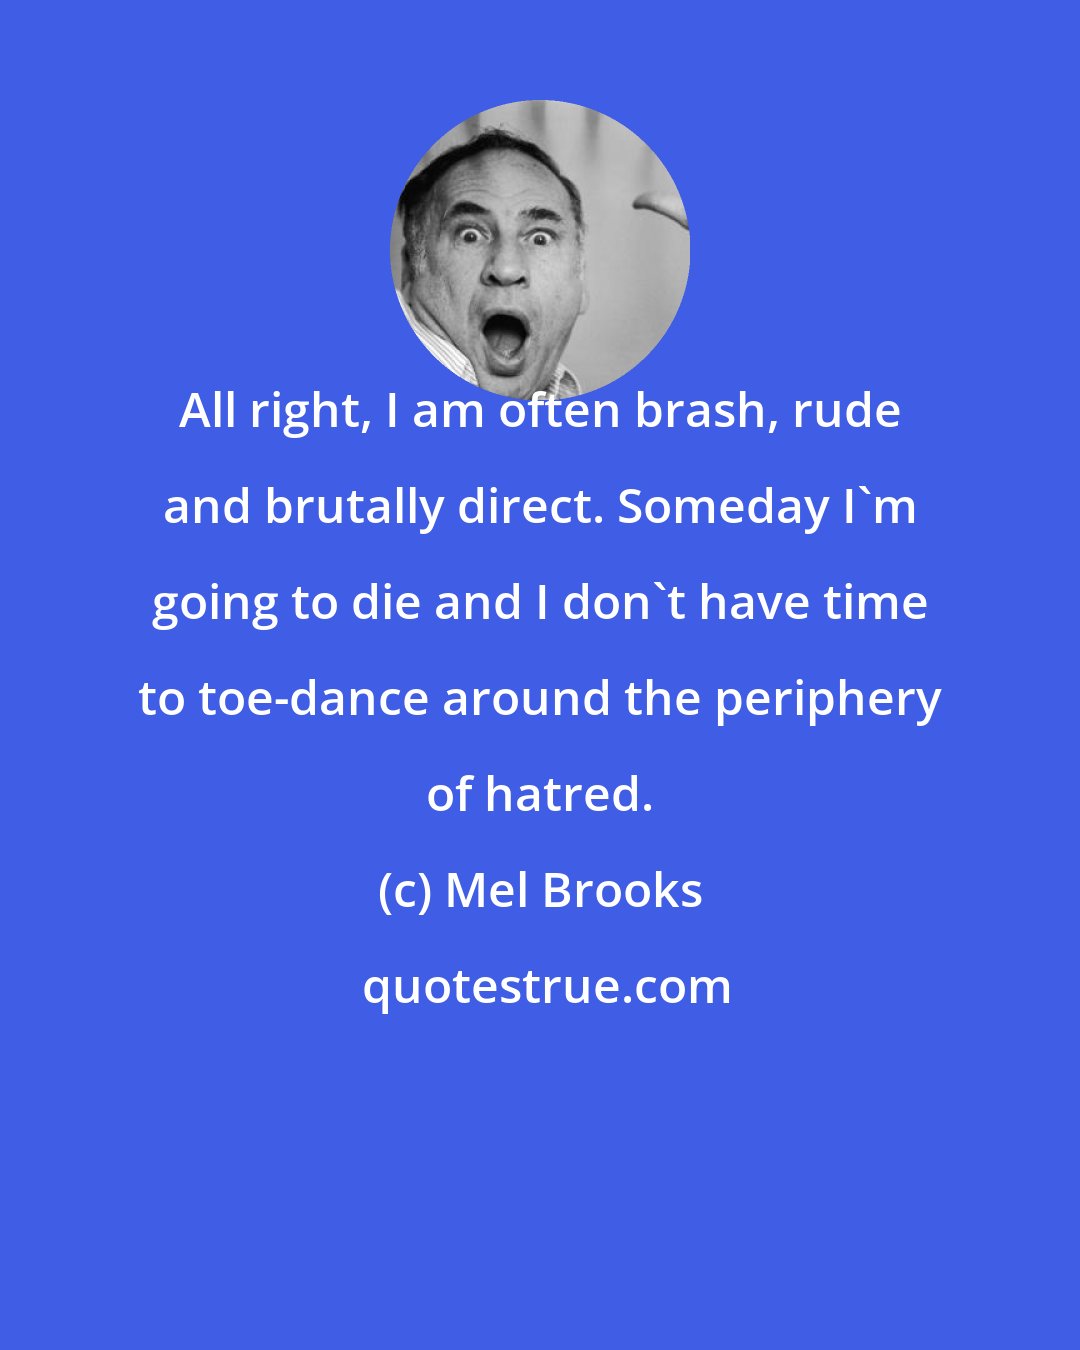 Mel Brooks: All right, I am often brash, rude and brutally direct. Someday I'm going to die and I don't have time to toe-dance around the periphery of hatred.